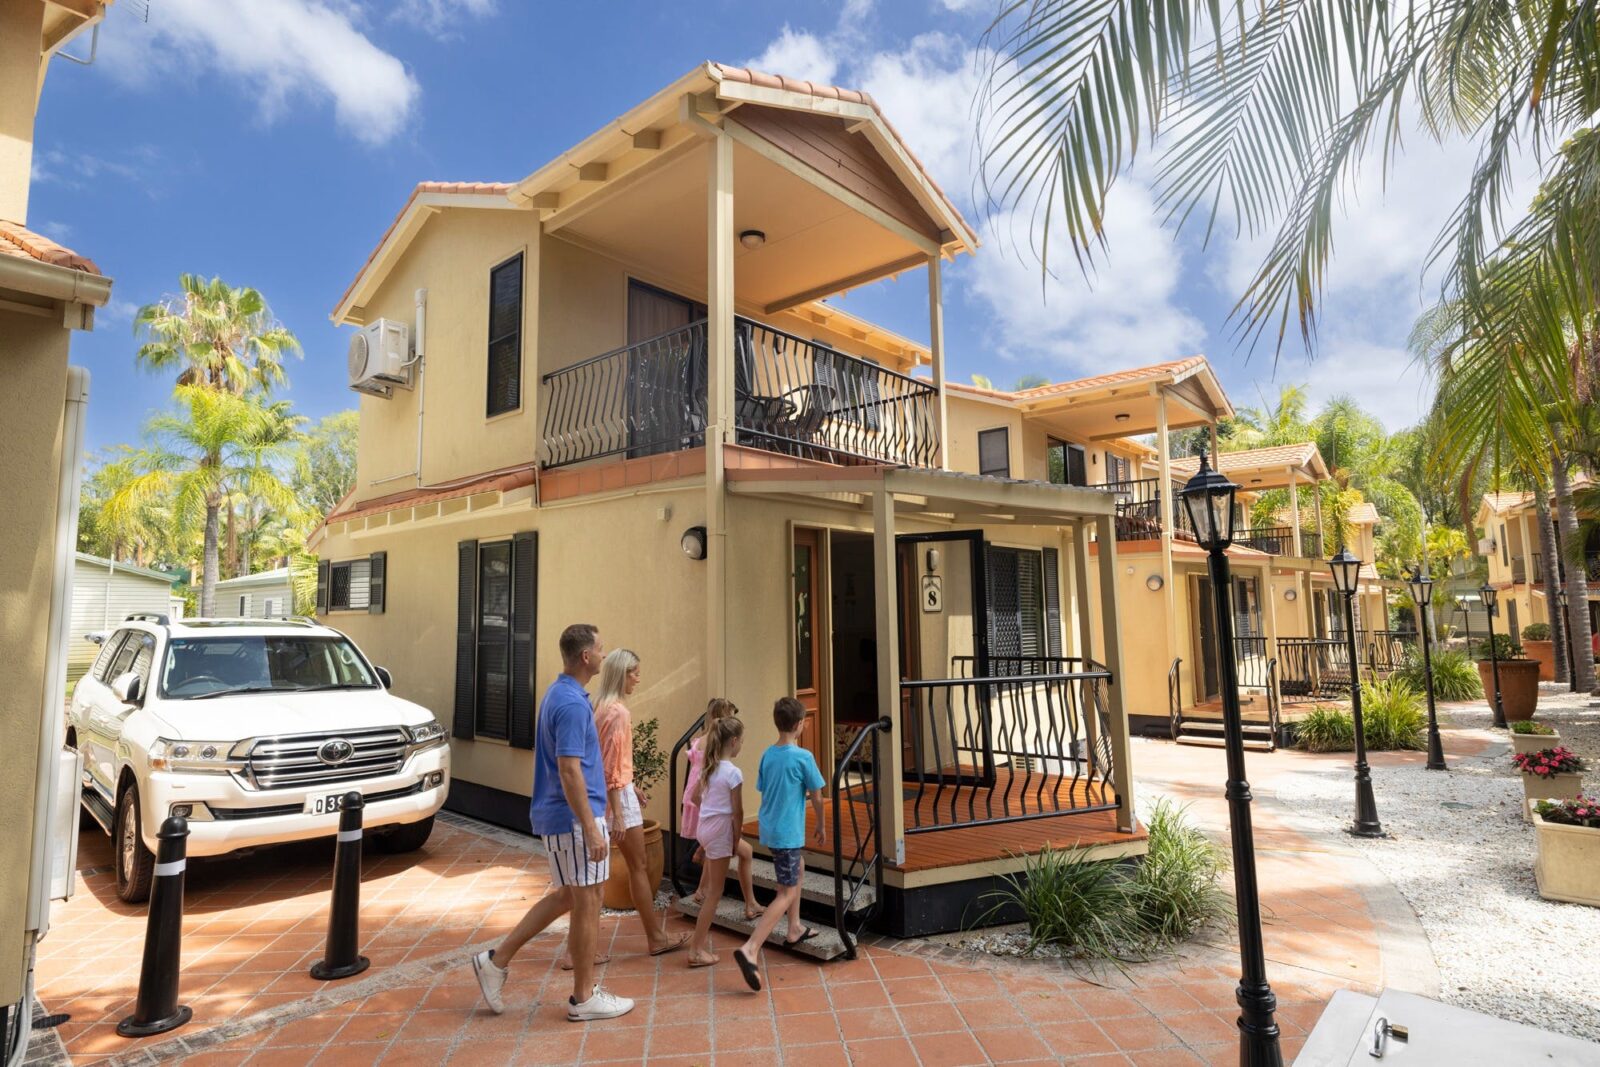 Macaw Mansion holiday accommodation at Ashmore Palms Holiday Village on the Gold Coast